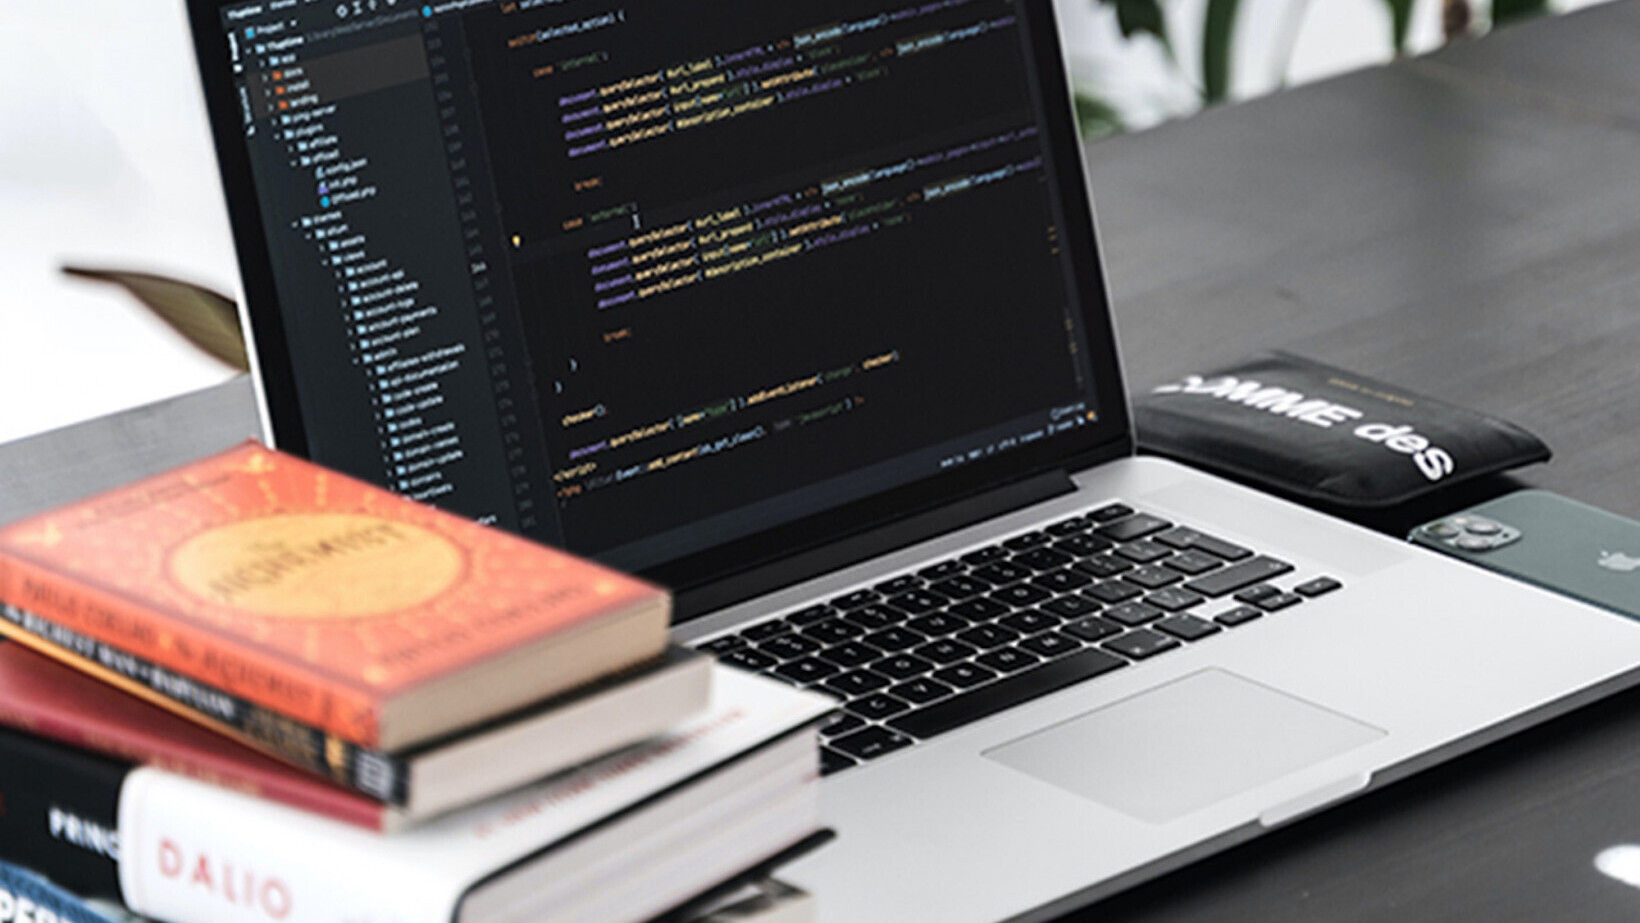 This pre-Black Friday sale on in-depth JavaScript training can make you a true coder in 2022